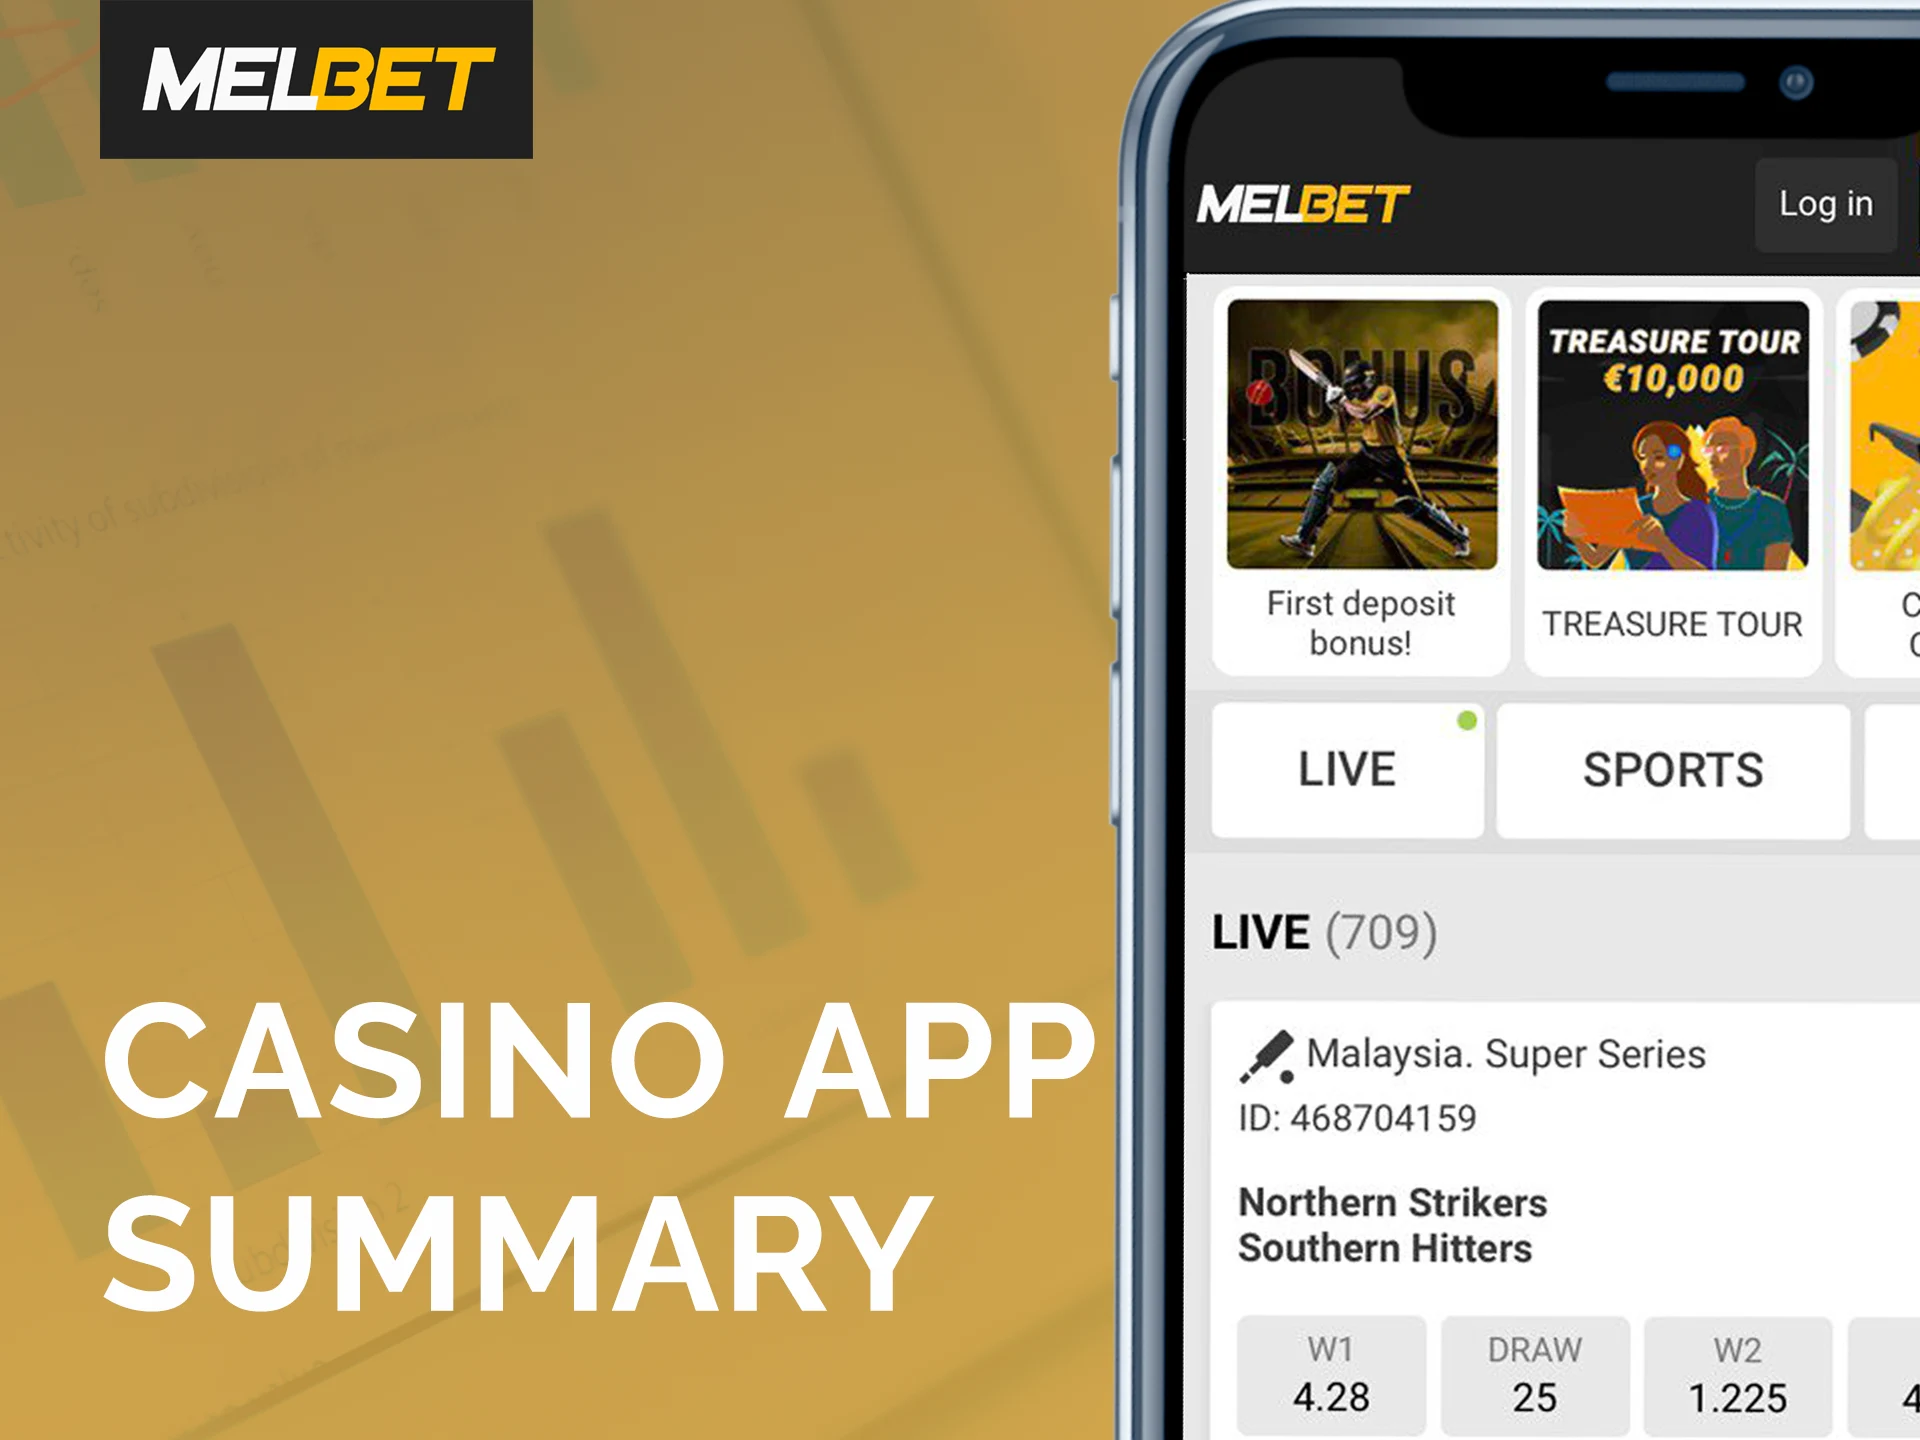 The Melbet casino app is an easy and practical way to access all your favorite games.